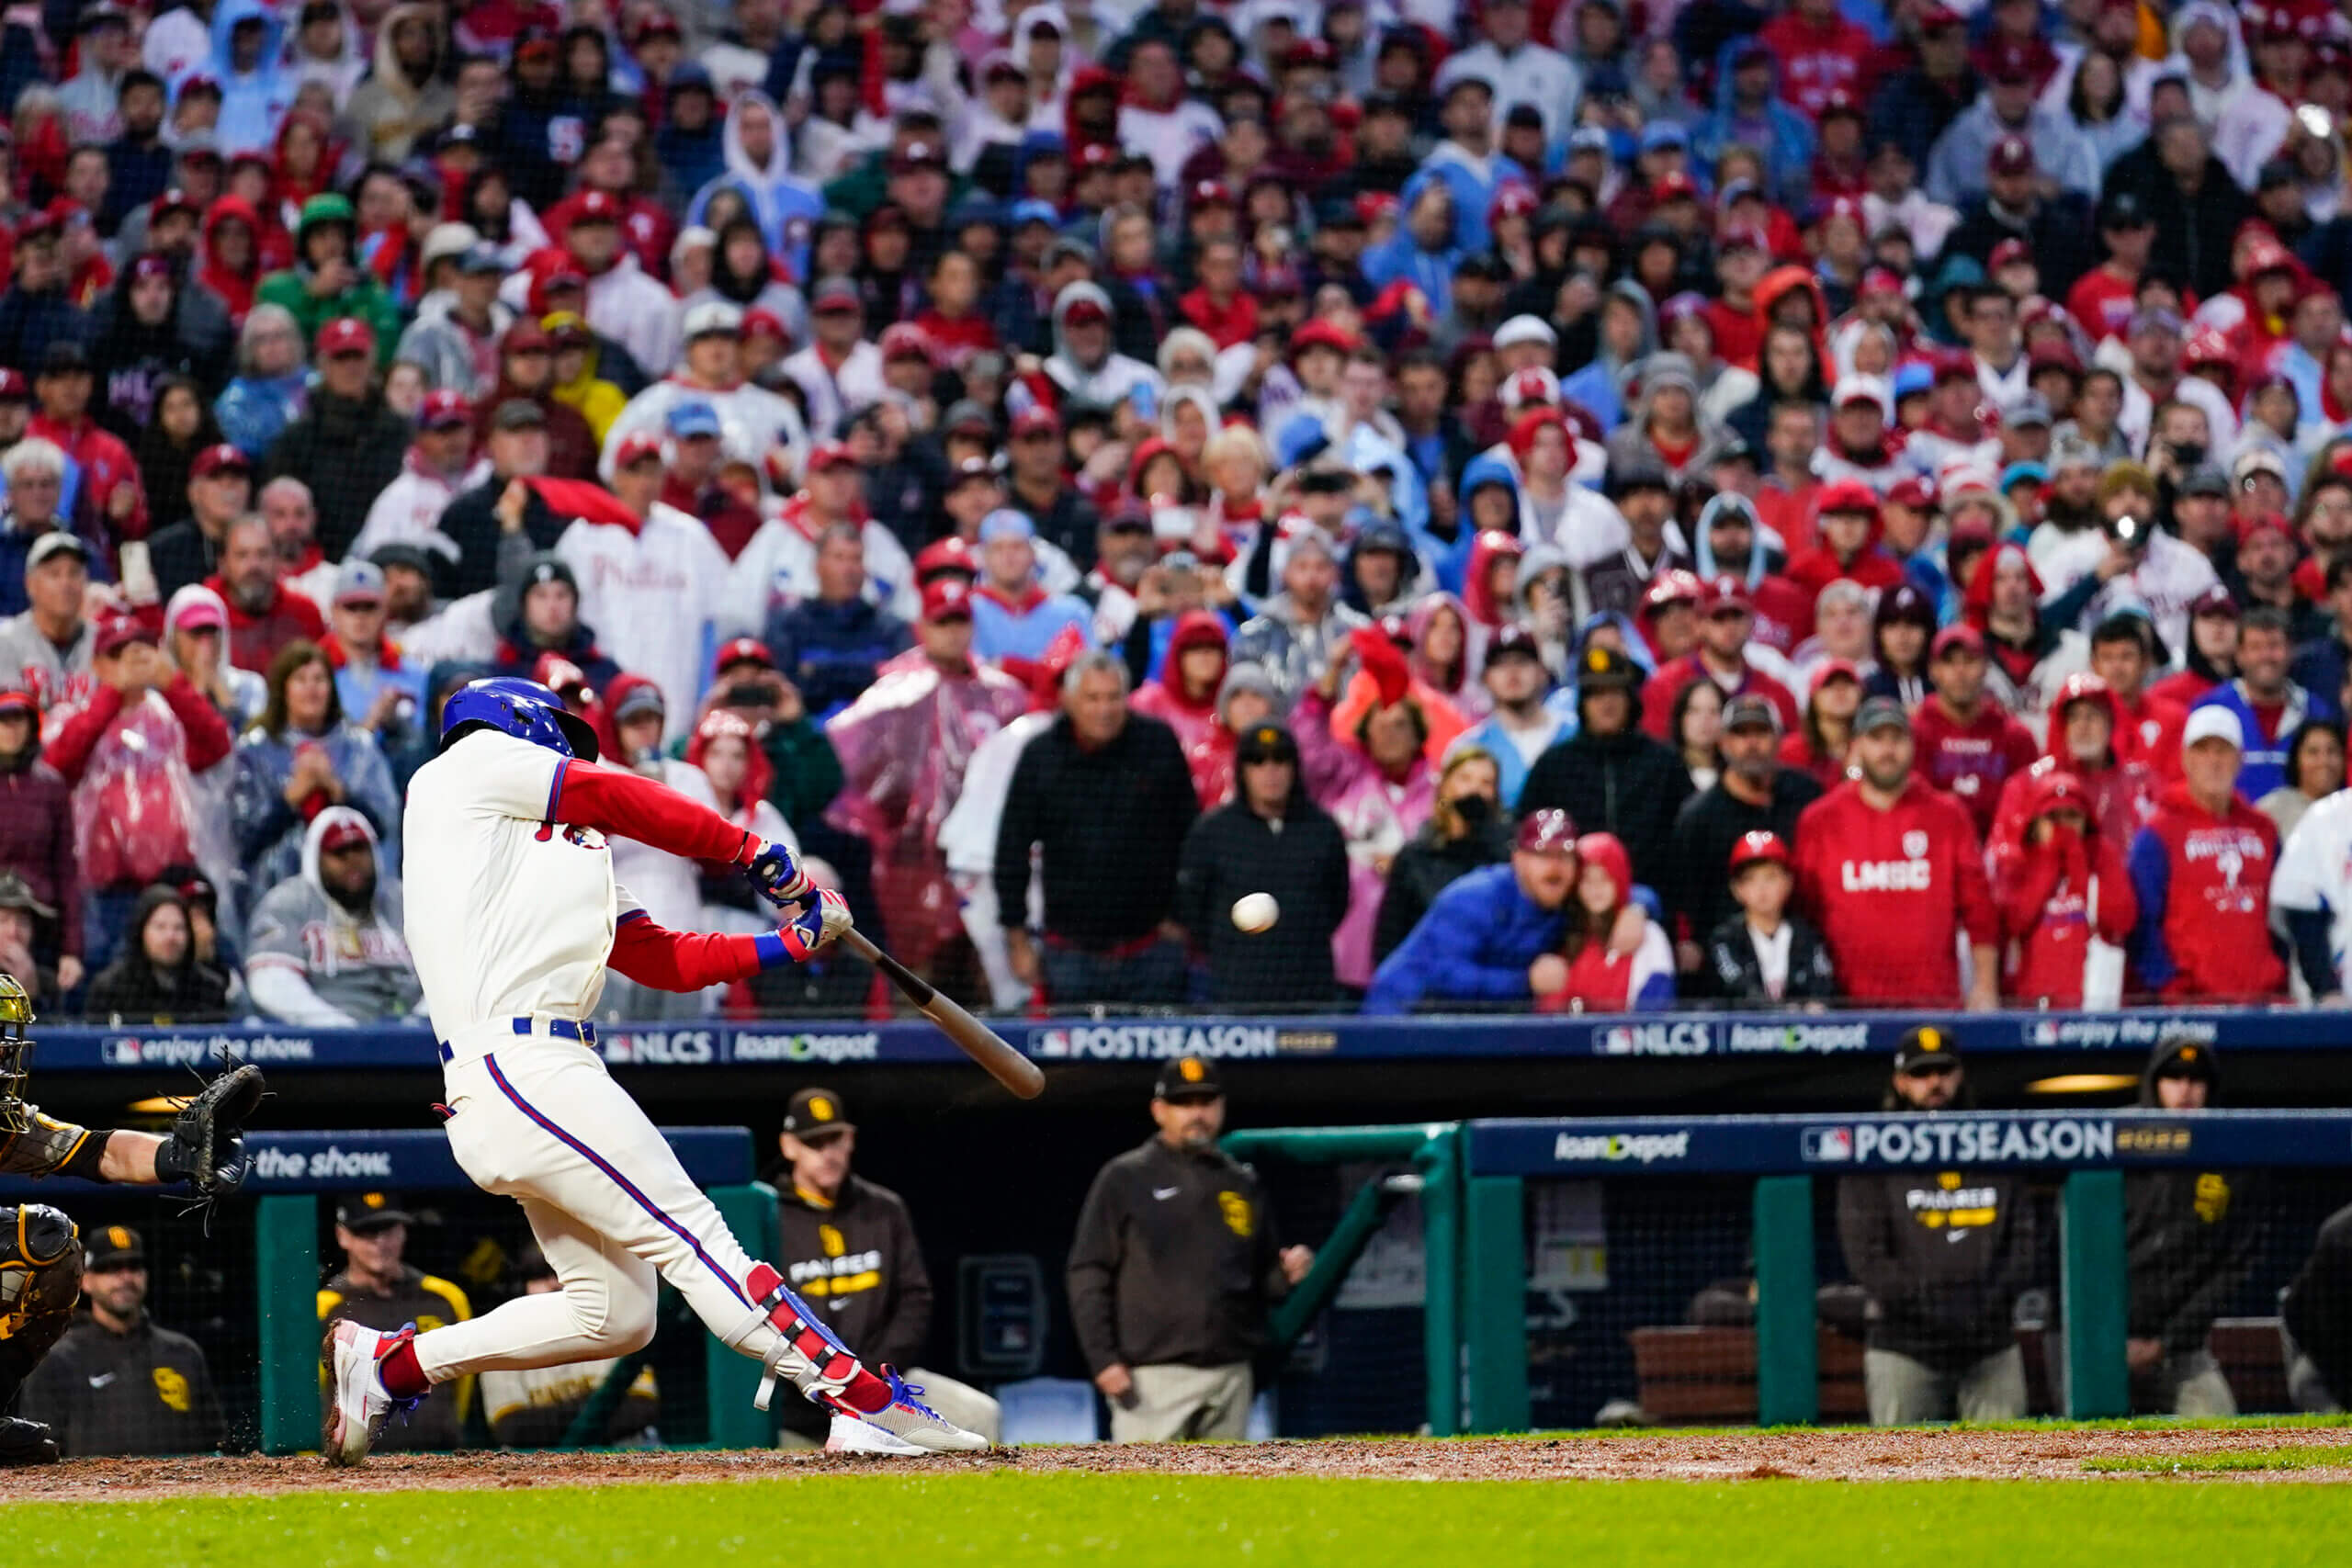 Bryce Harper's late home run beats Padres, sends Phillies to World Series